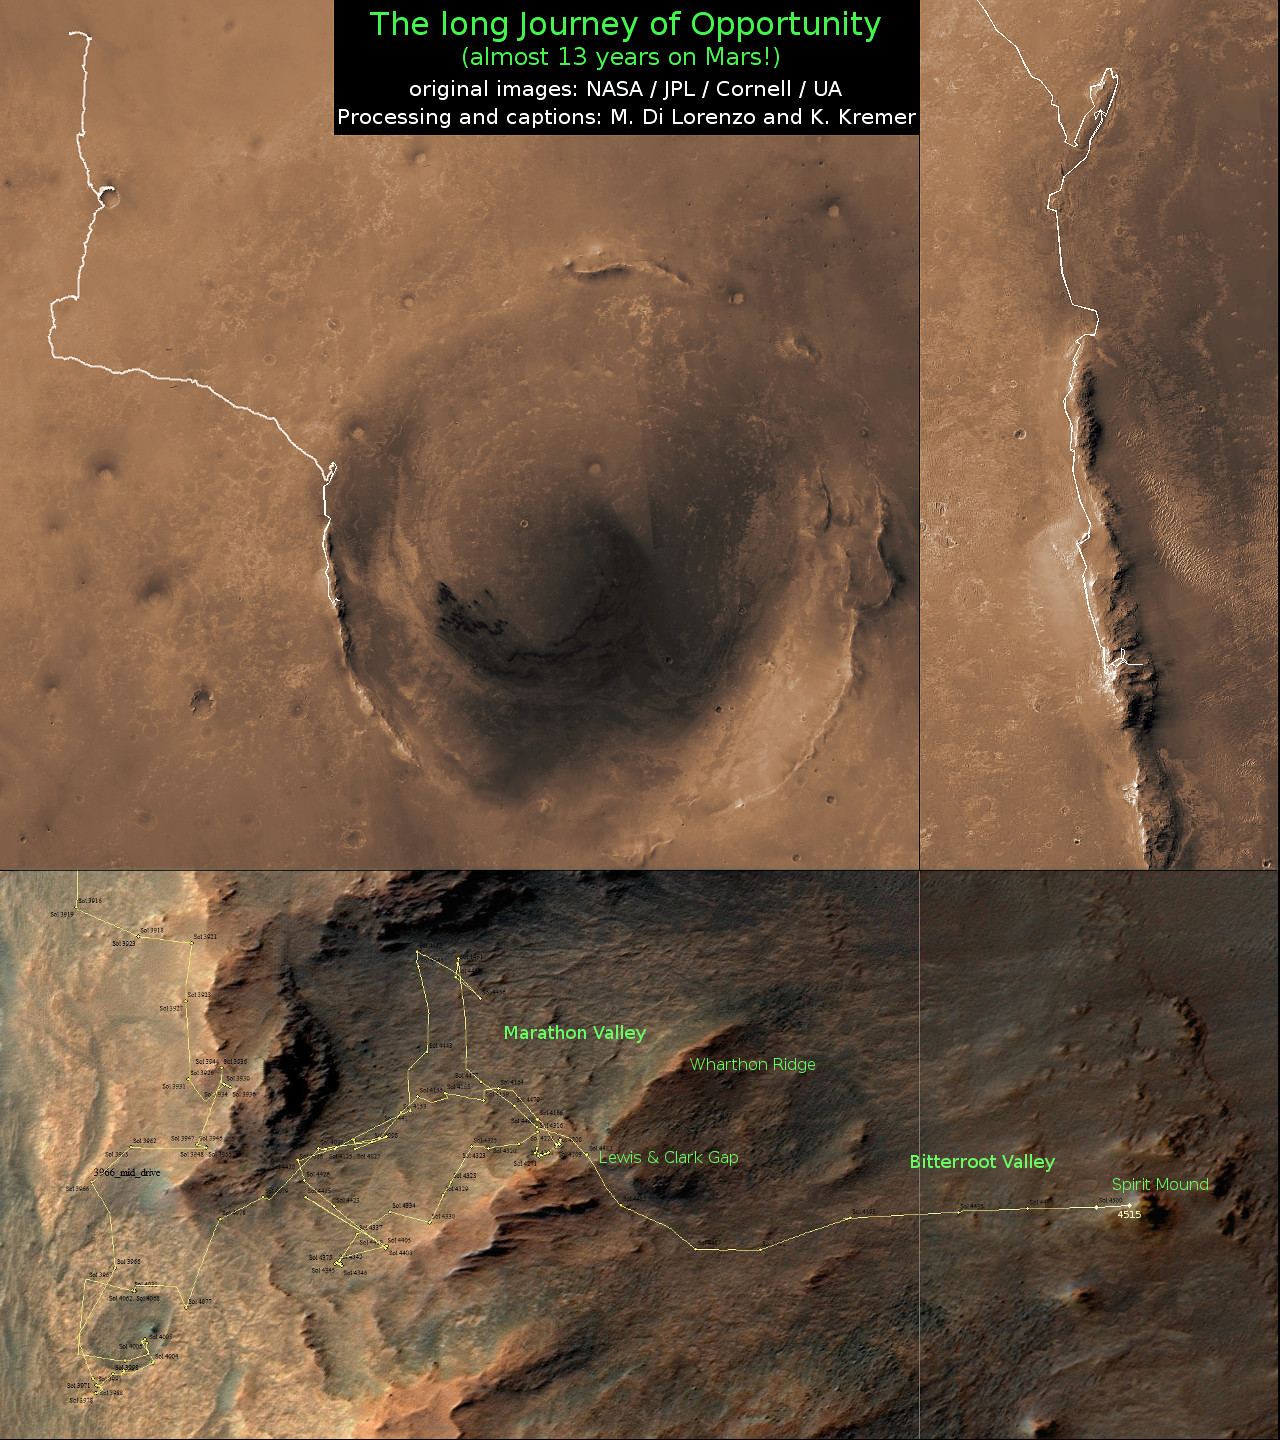 12 Year Traverse Map for NASA’s Opportunity rover from 2004 to 2016. This map shows the entire path the rover has driven on the Red Planet during more than 12 years and more than a marathon runners distance for over 4514 Sols, or Martian days, since landing inside Eagle Crater on Jan 24, 2004 - to current location at the western rim of Endeavour Crater after descending down Marathon Valley. Rover surpassed Marathon distance on Sol 3968 and marked 11th Martian anniversary on Sol 3911. Opportunity discovered clay minerals at Esperance – indicative of a habitable zone - and searched for more at Marathon Valley and is now at Spirit Mound on the way to a Martian gully.  Credit: NASA/JPL/Cornell/ASU/Marco Di Lorenzo/Ken Kremer/kenkremer.com 